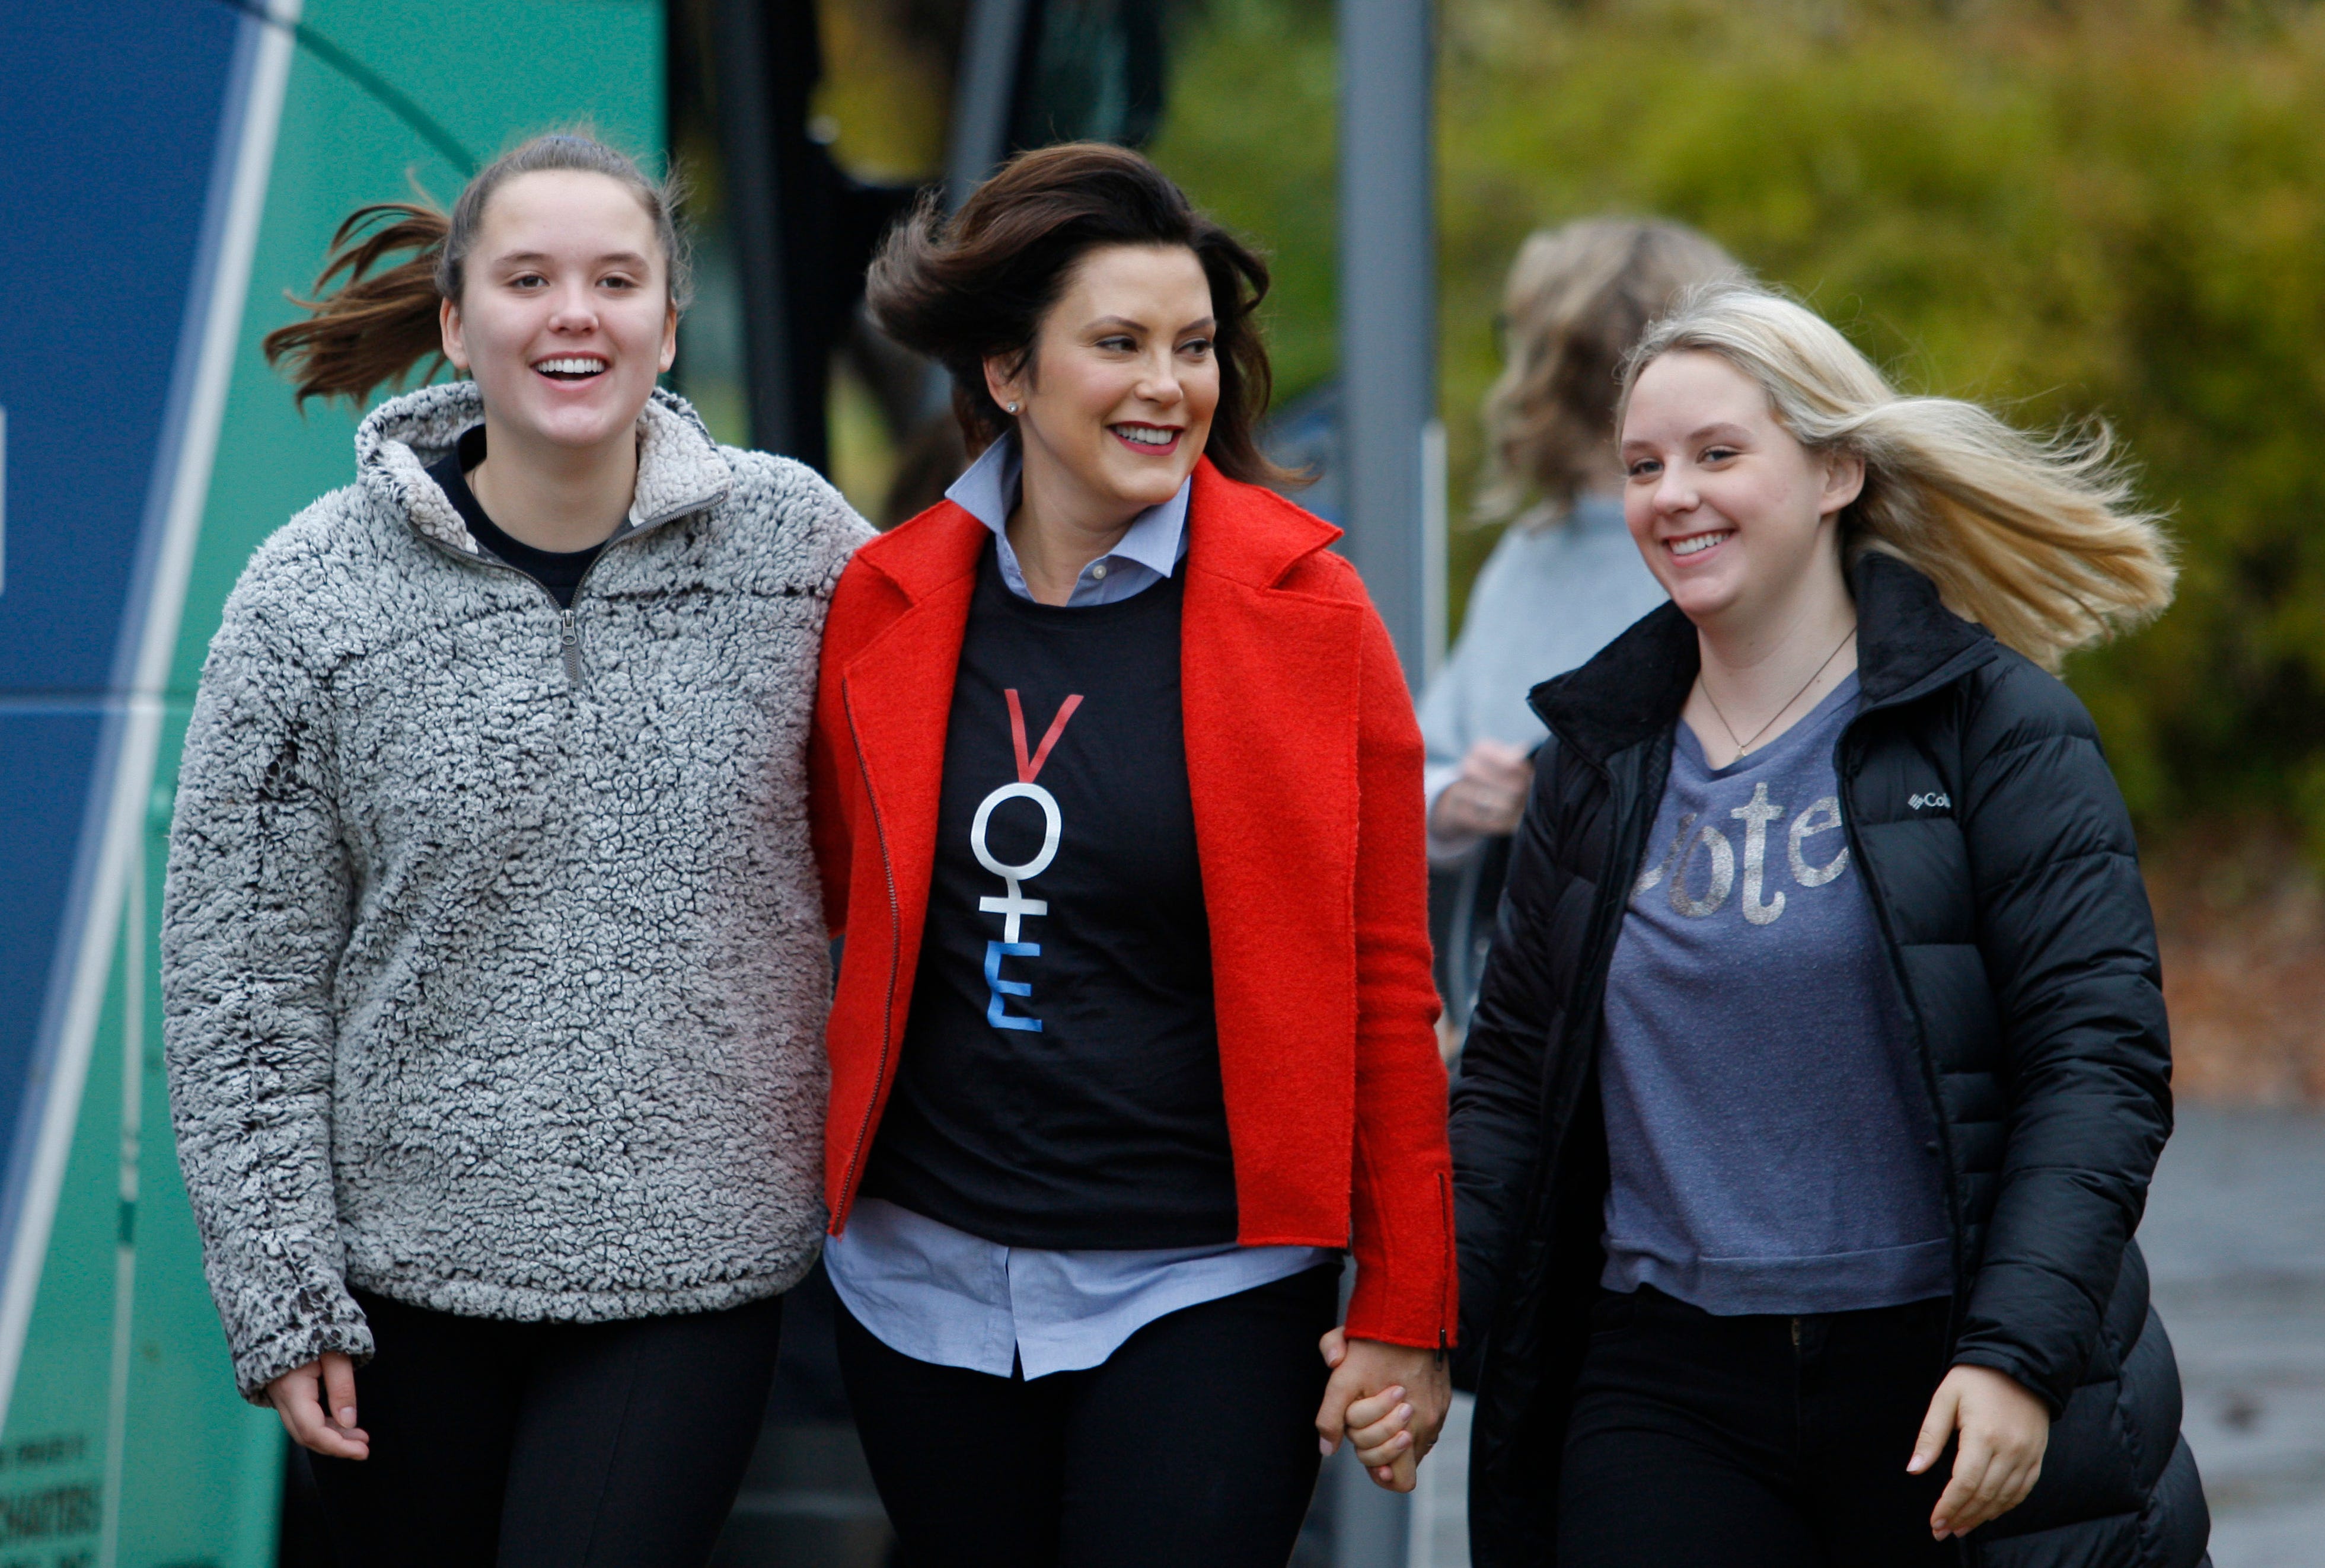 Michigan Democratic gubernatorial candidate Gretchen Whitmer, center, walks from her campaign bus to the polling place with daughters Sherry, left, and Sydney, Tuesday, Nov. 6, 2018, at St. Paul Lutheran Church in East Lansing.